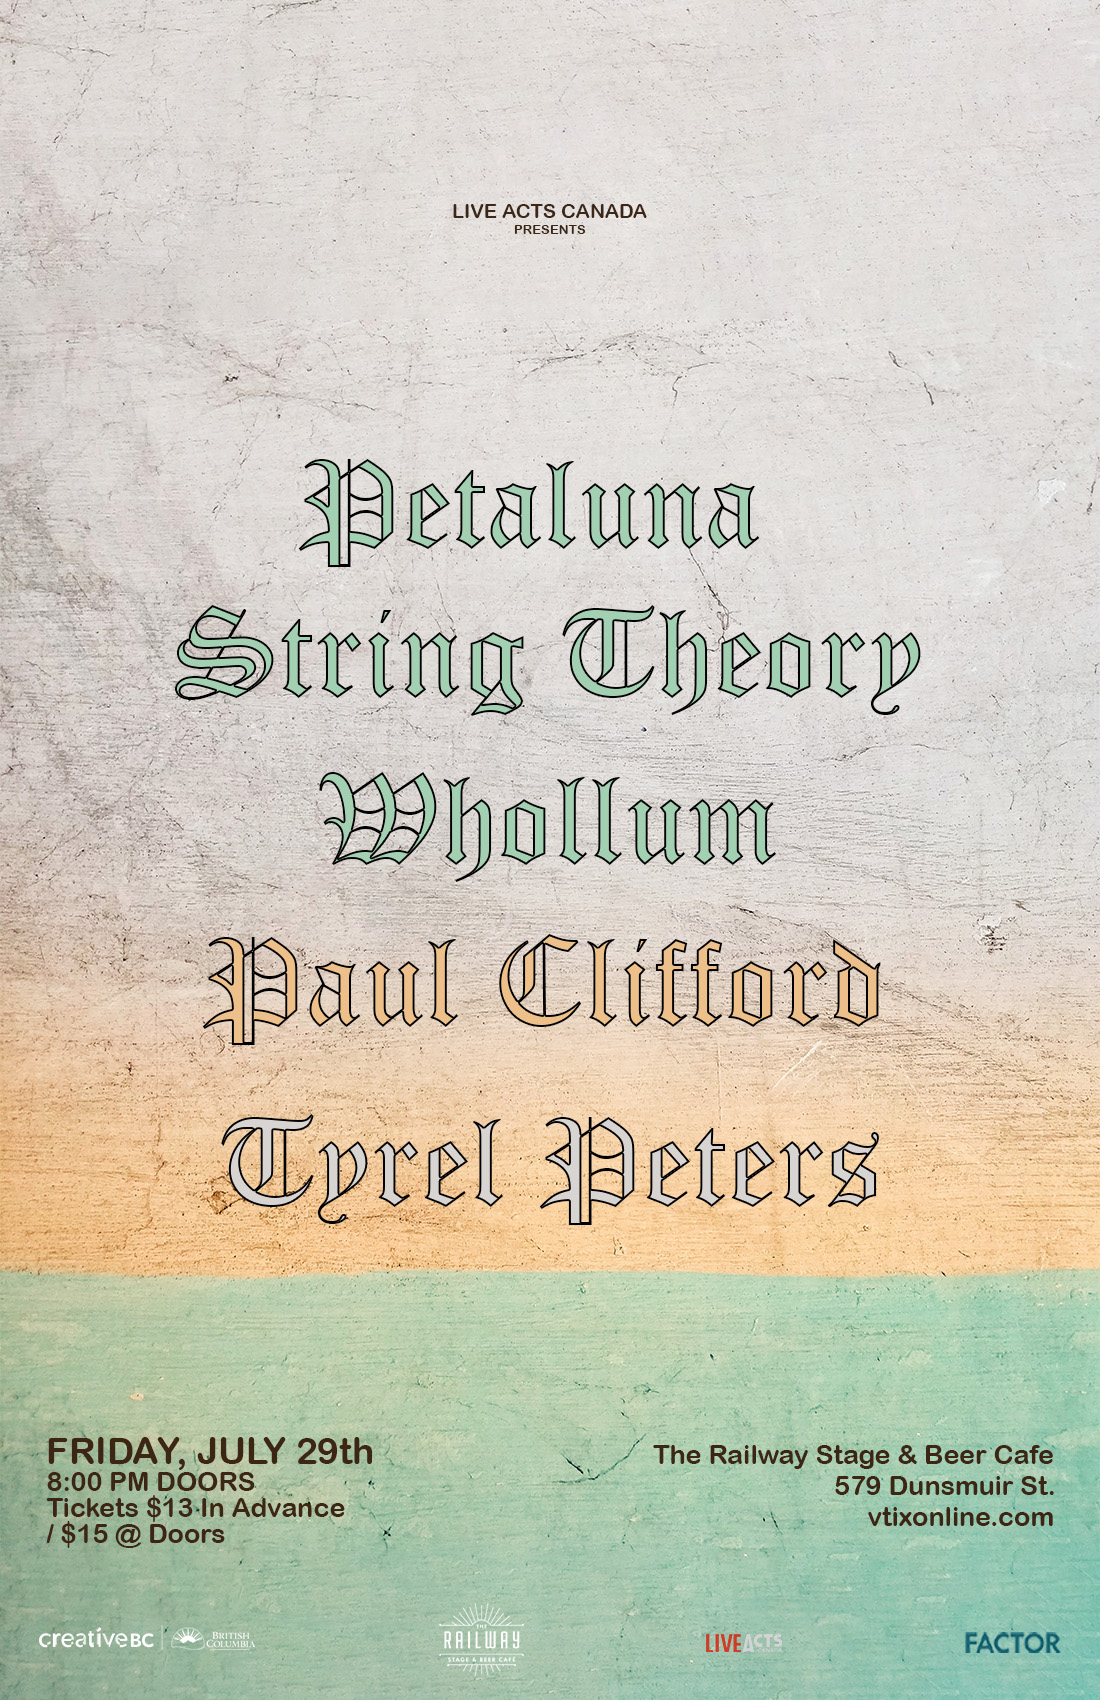 Petaluna with Special Guests String Theory, Whollum, Paul Clifford, and Tyrel Peters